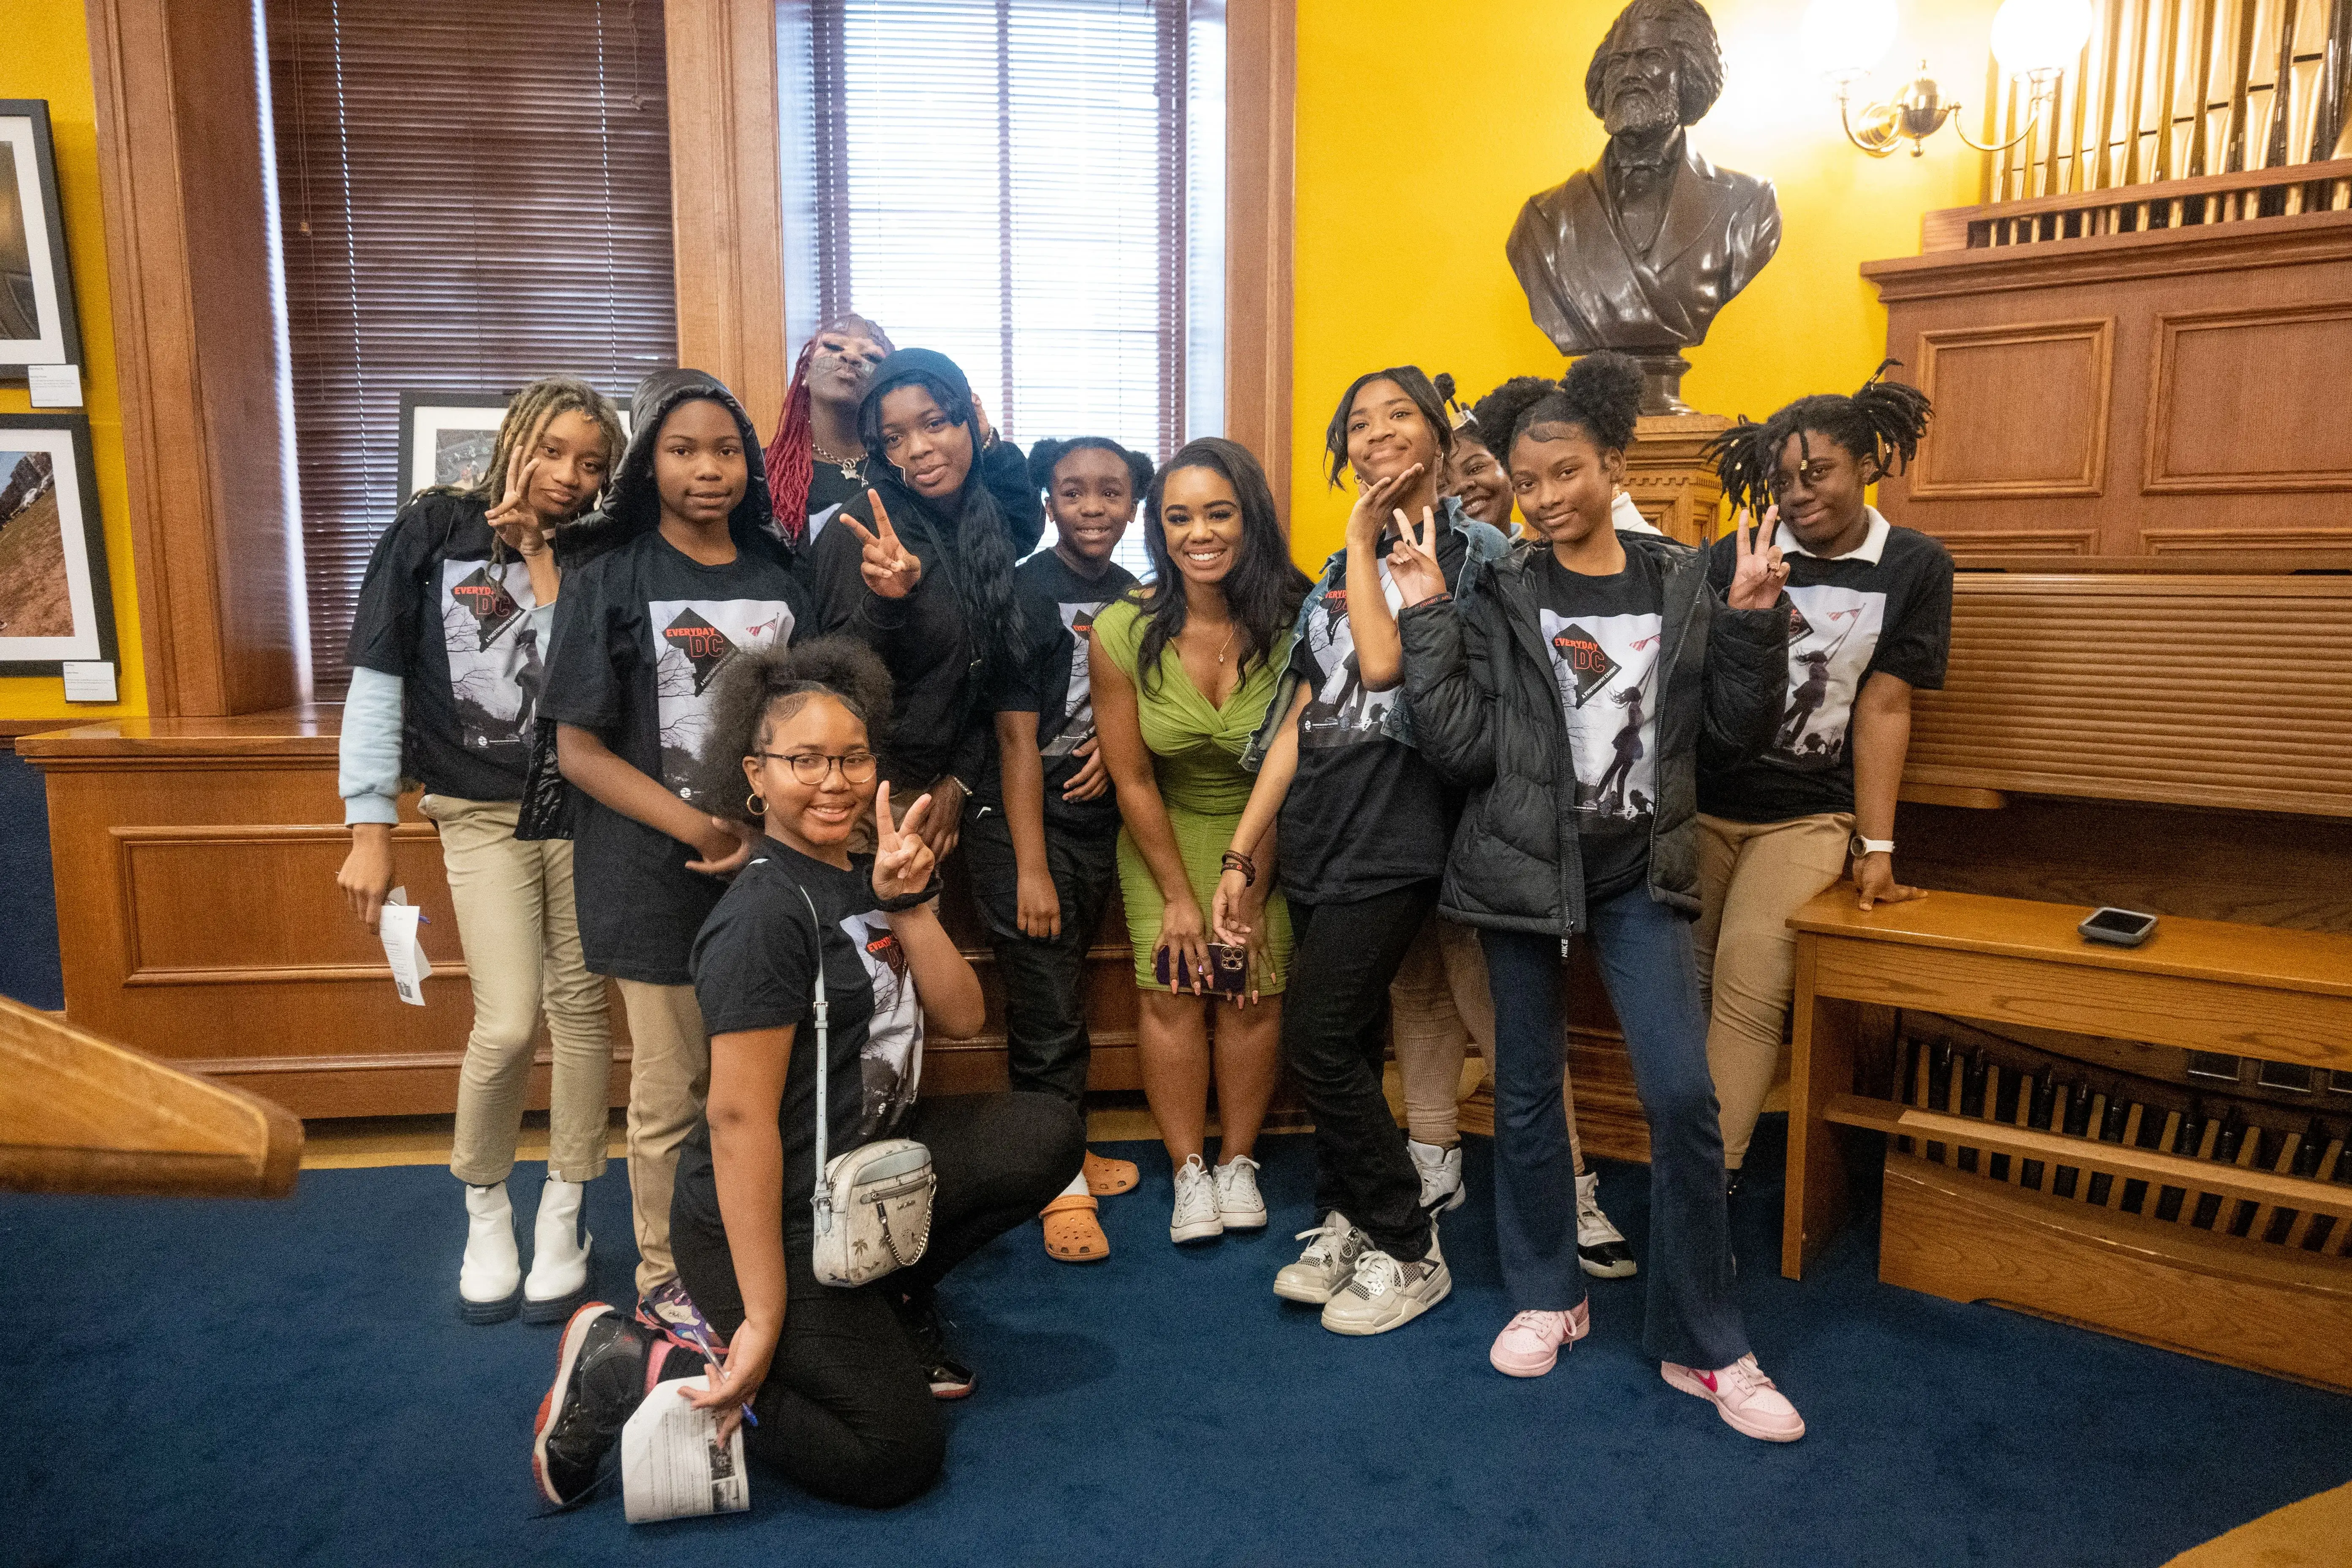 Students in black t-shirts from Excel Academy pose with journalist Ashonti Ford following her keynote speech at the Everyday DC student symposium at the Charles Sumner Museum and Archives in Washington, D.C